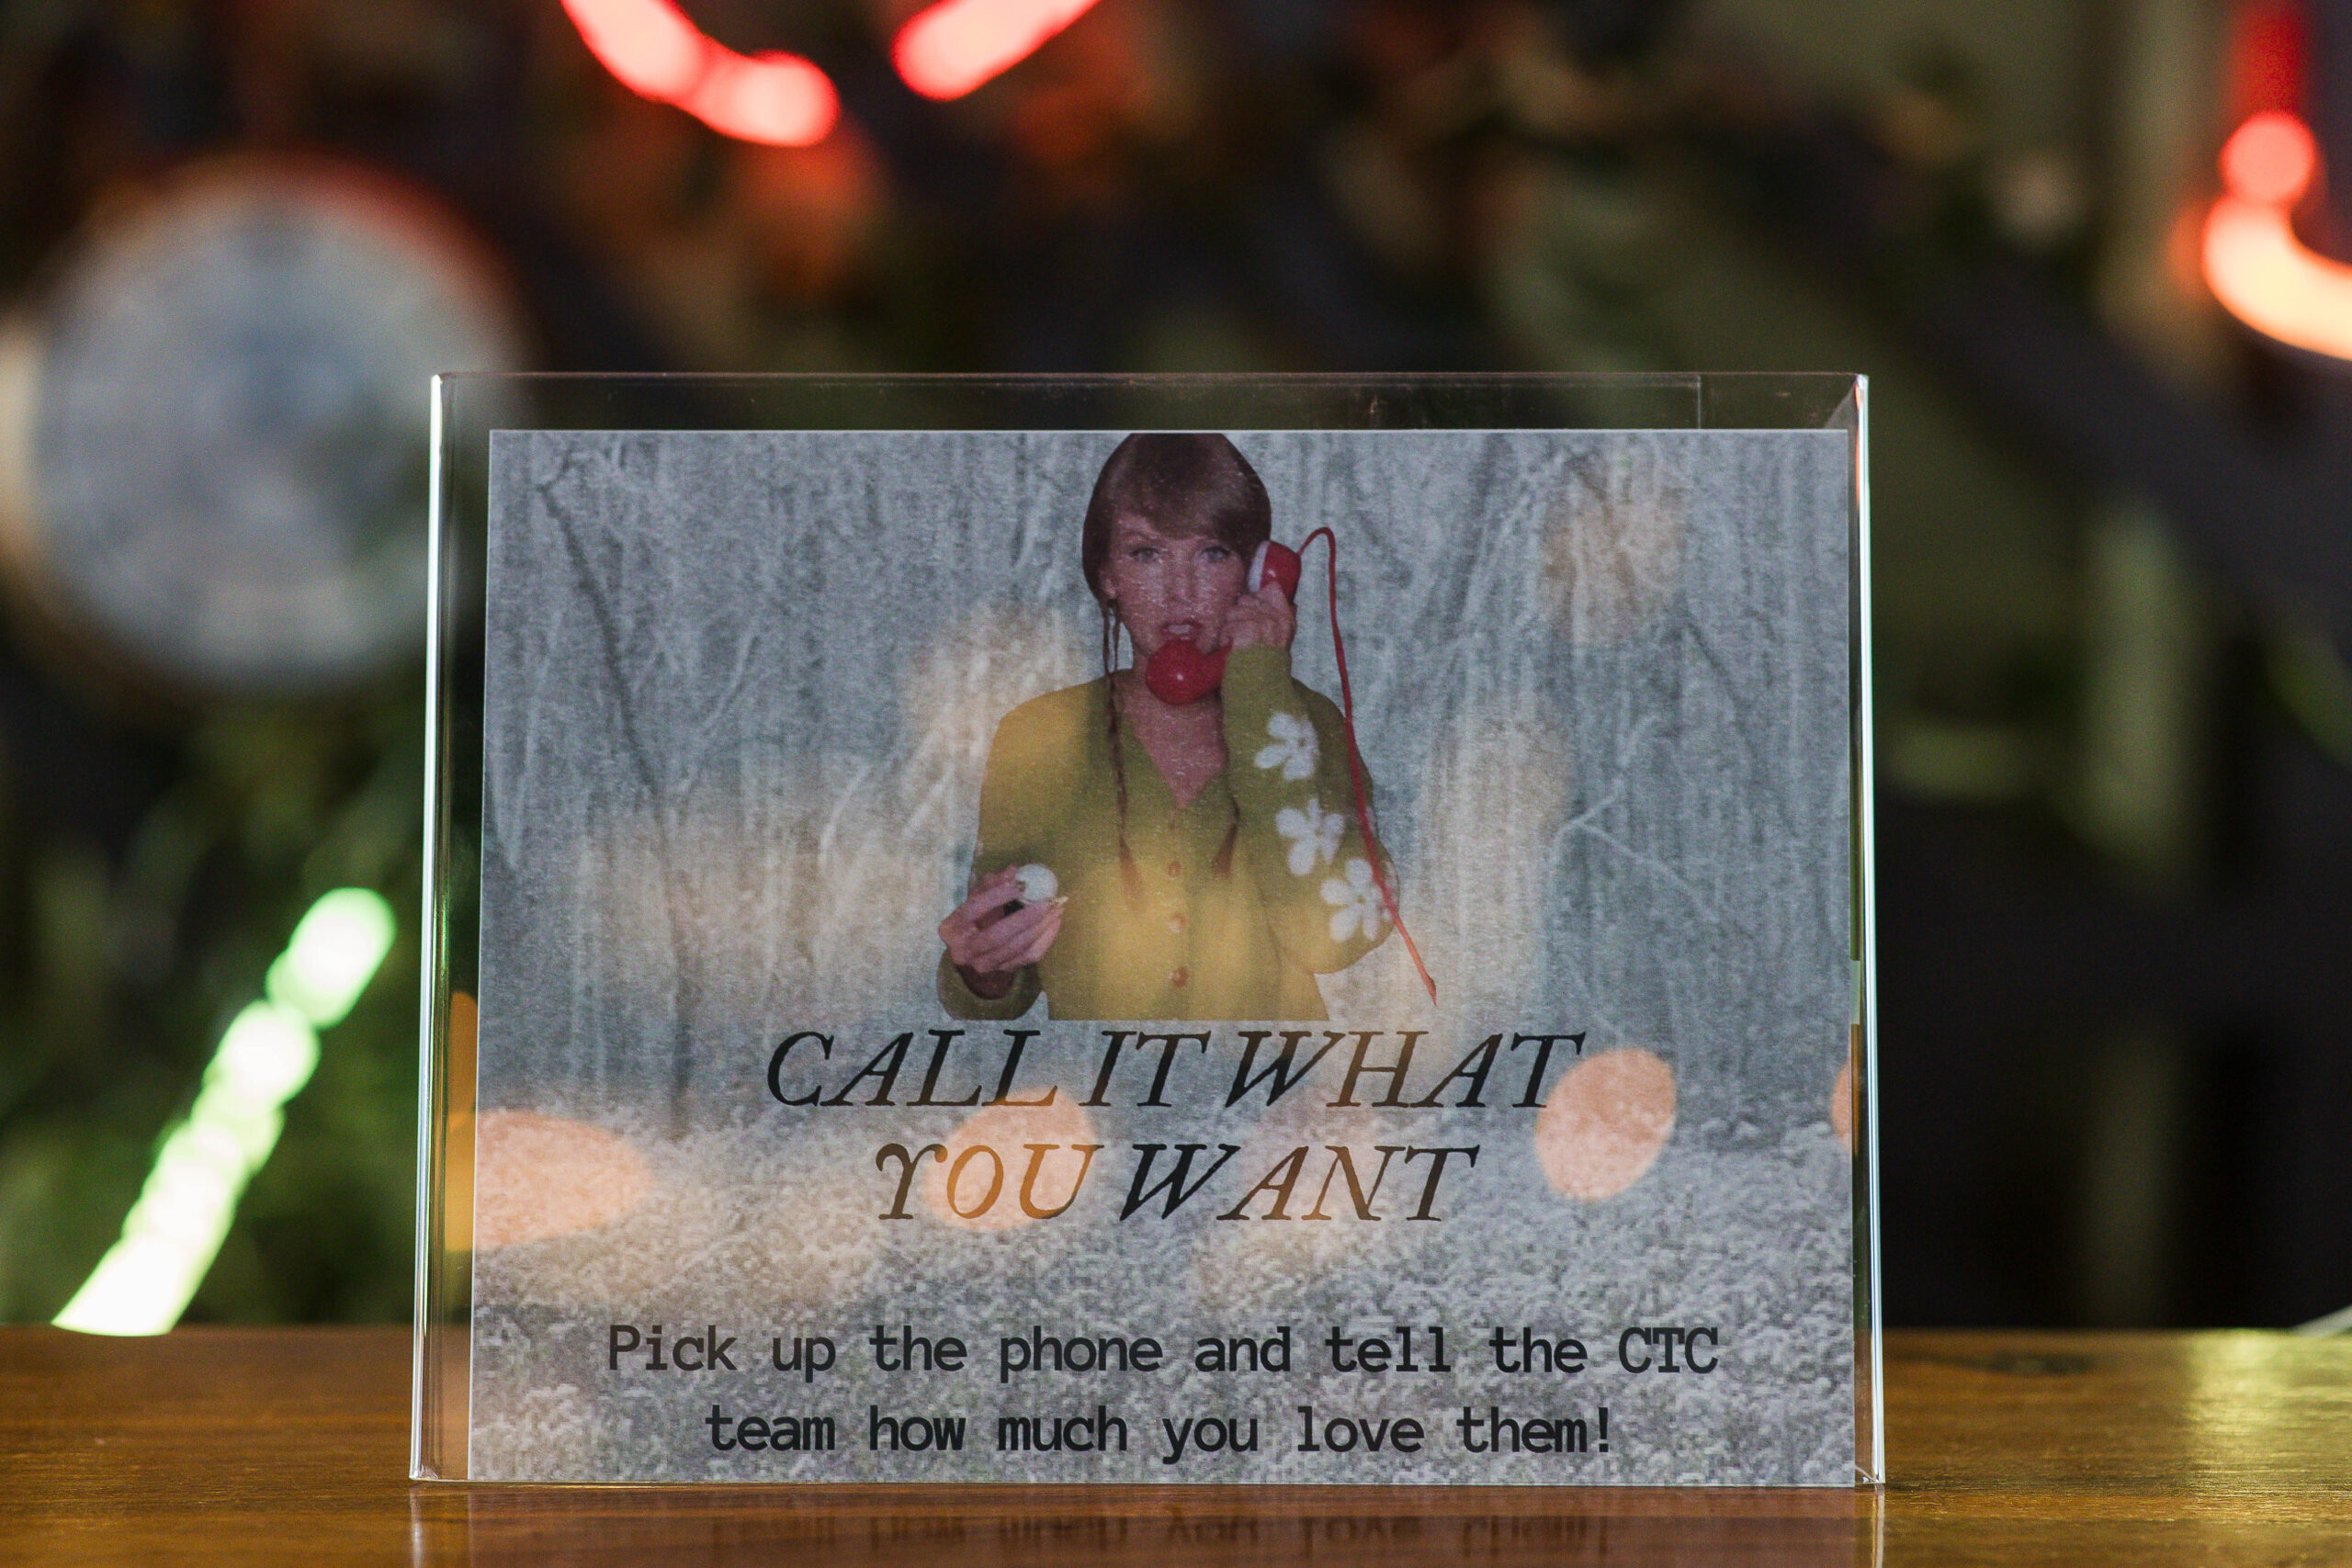 Picture Of Taylor Swift While On The Phone With &Quot;Call It What You Want'' Written